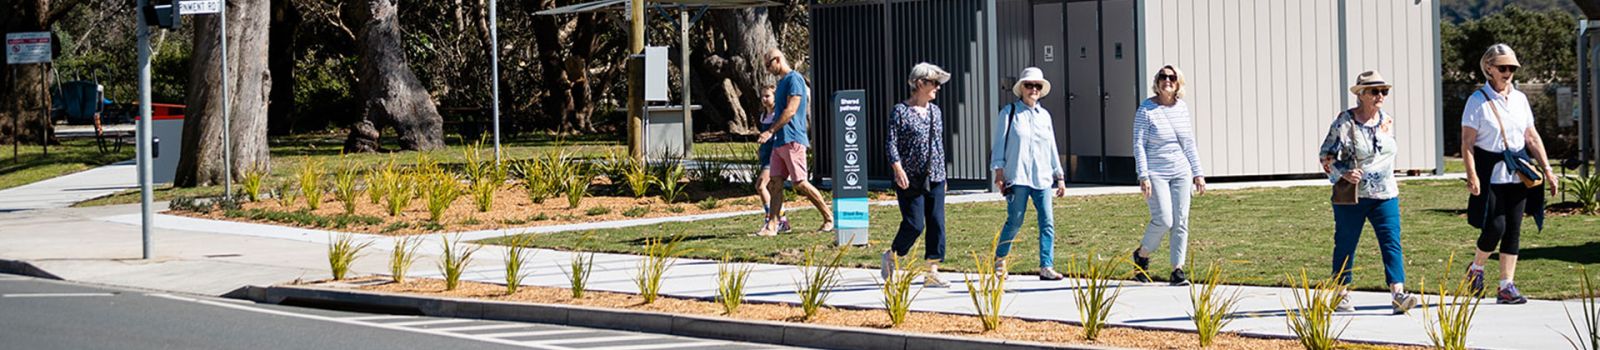 People walking along a pathway near a beach  banner image